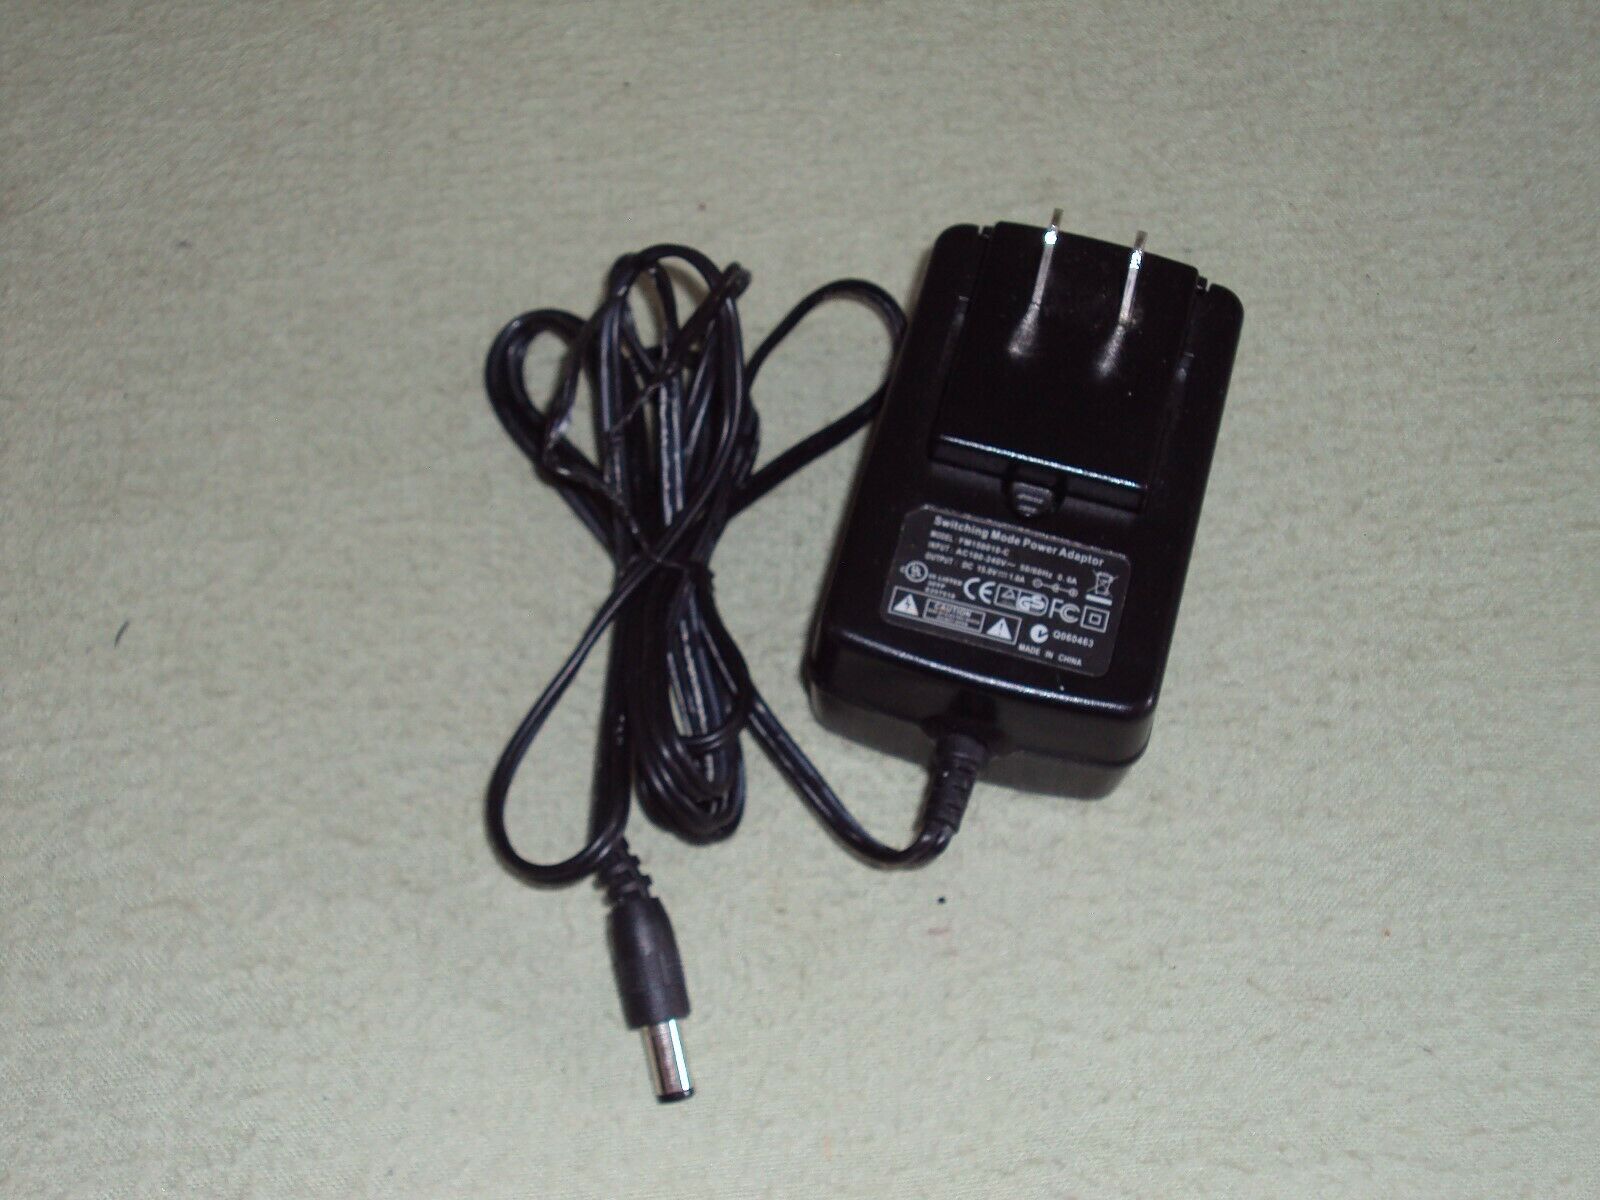 New Switching Mode Power Supply Adaptor FM150010-C 15V 1A Transformer Adapter